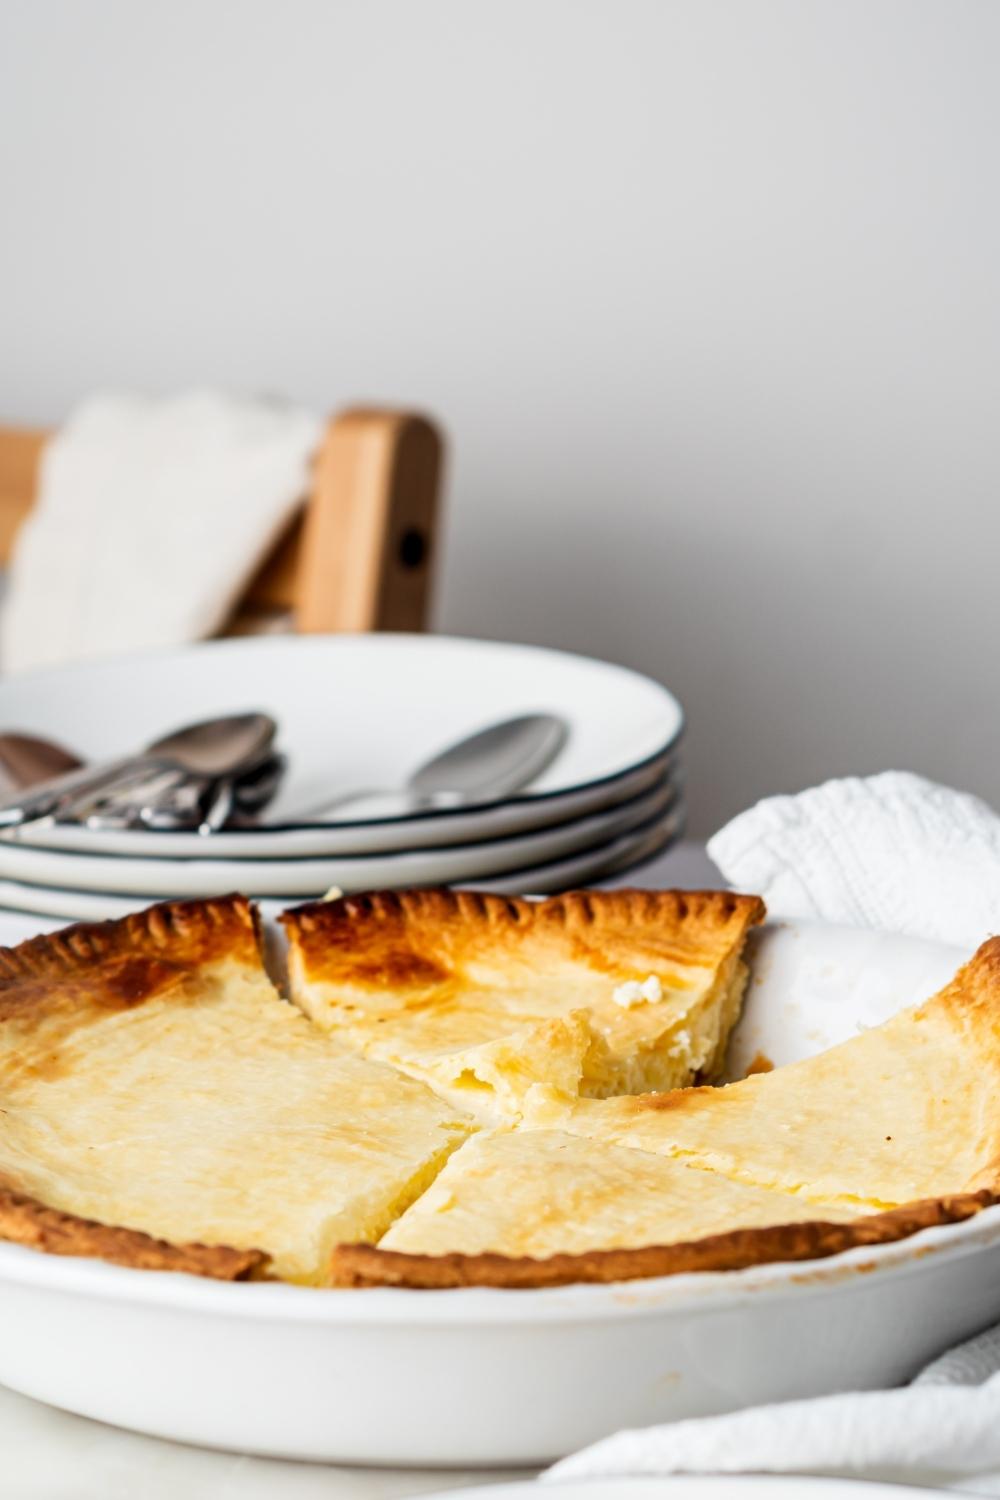 A whole ricotta pie with one piece missing from it in a pie dish.